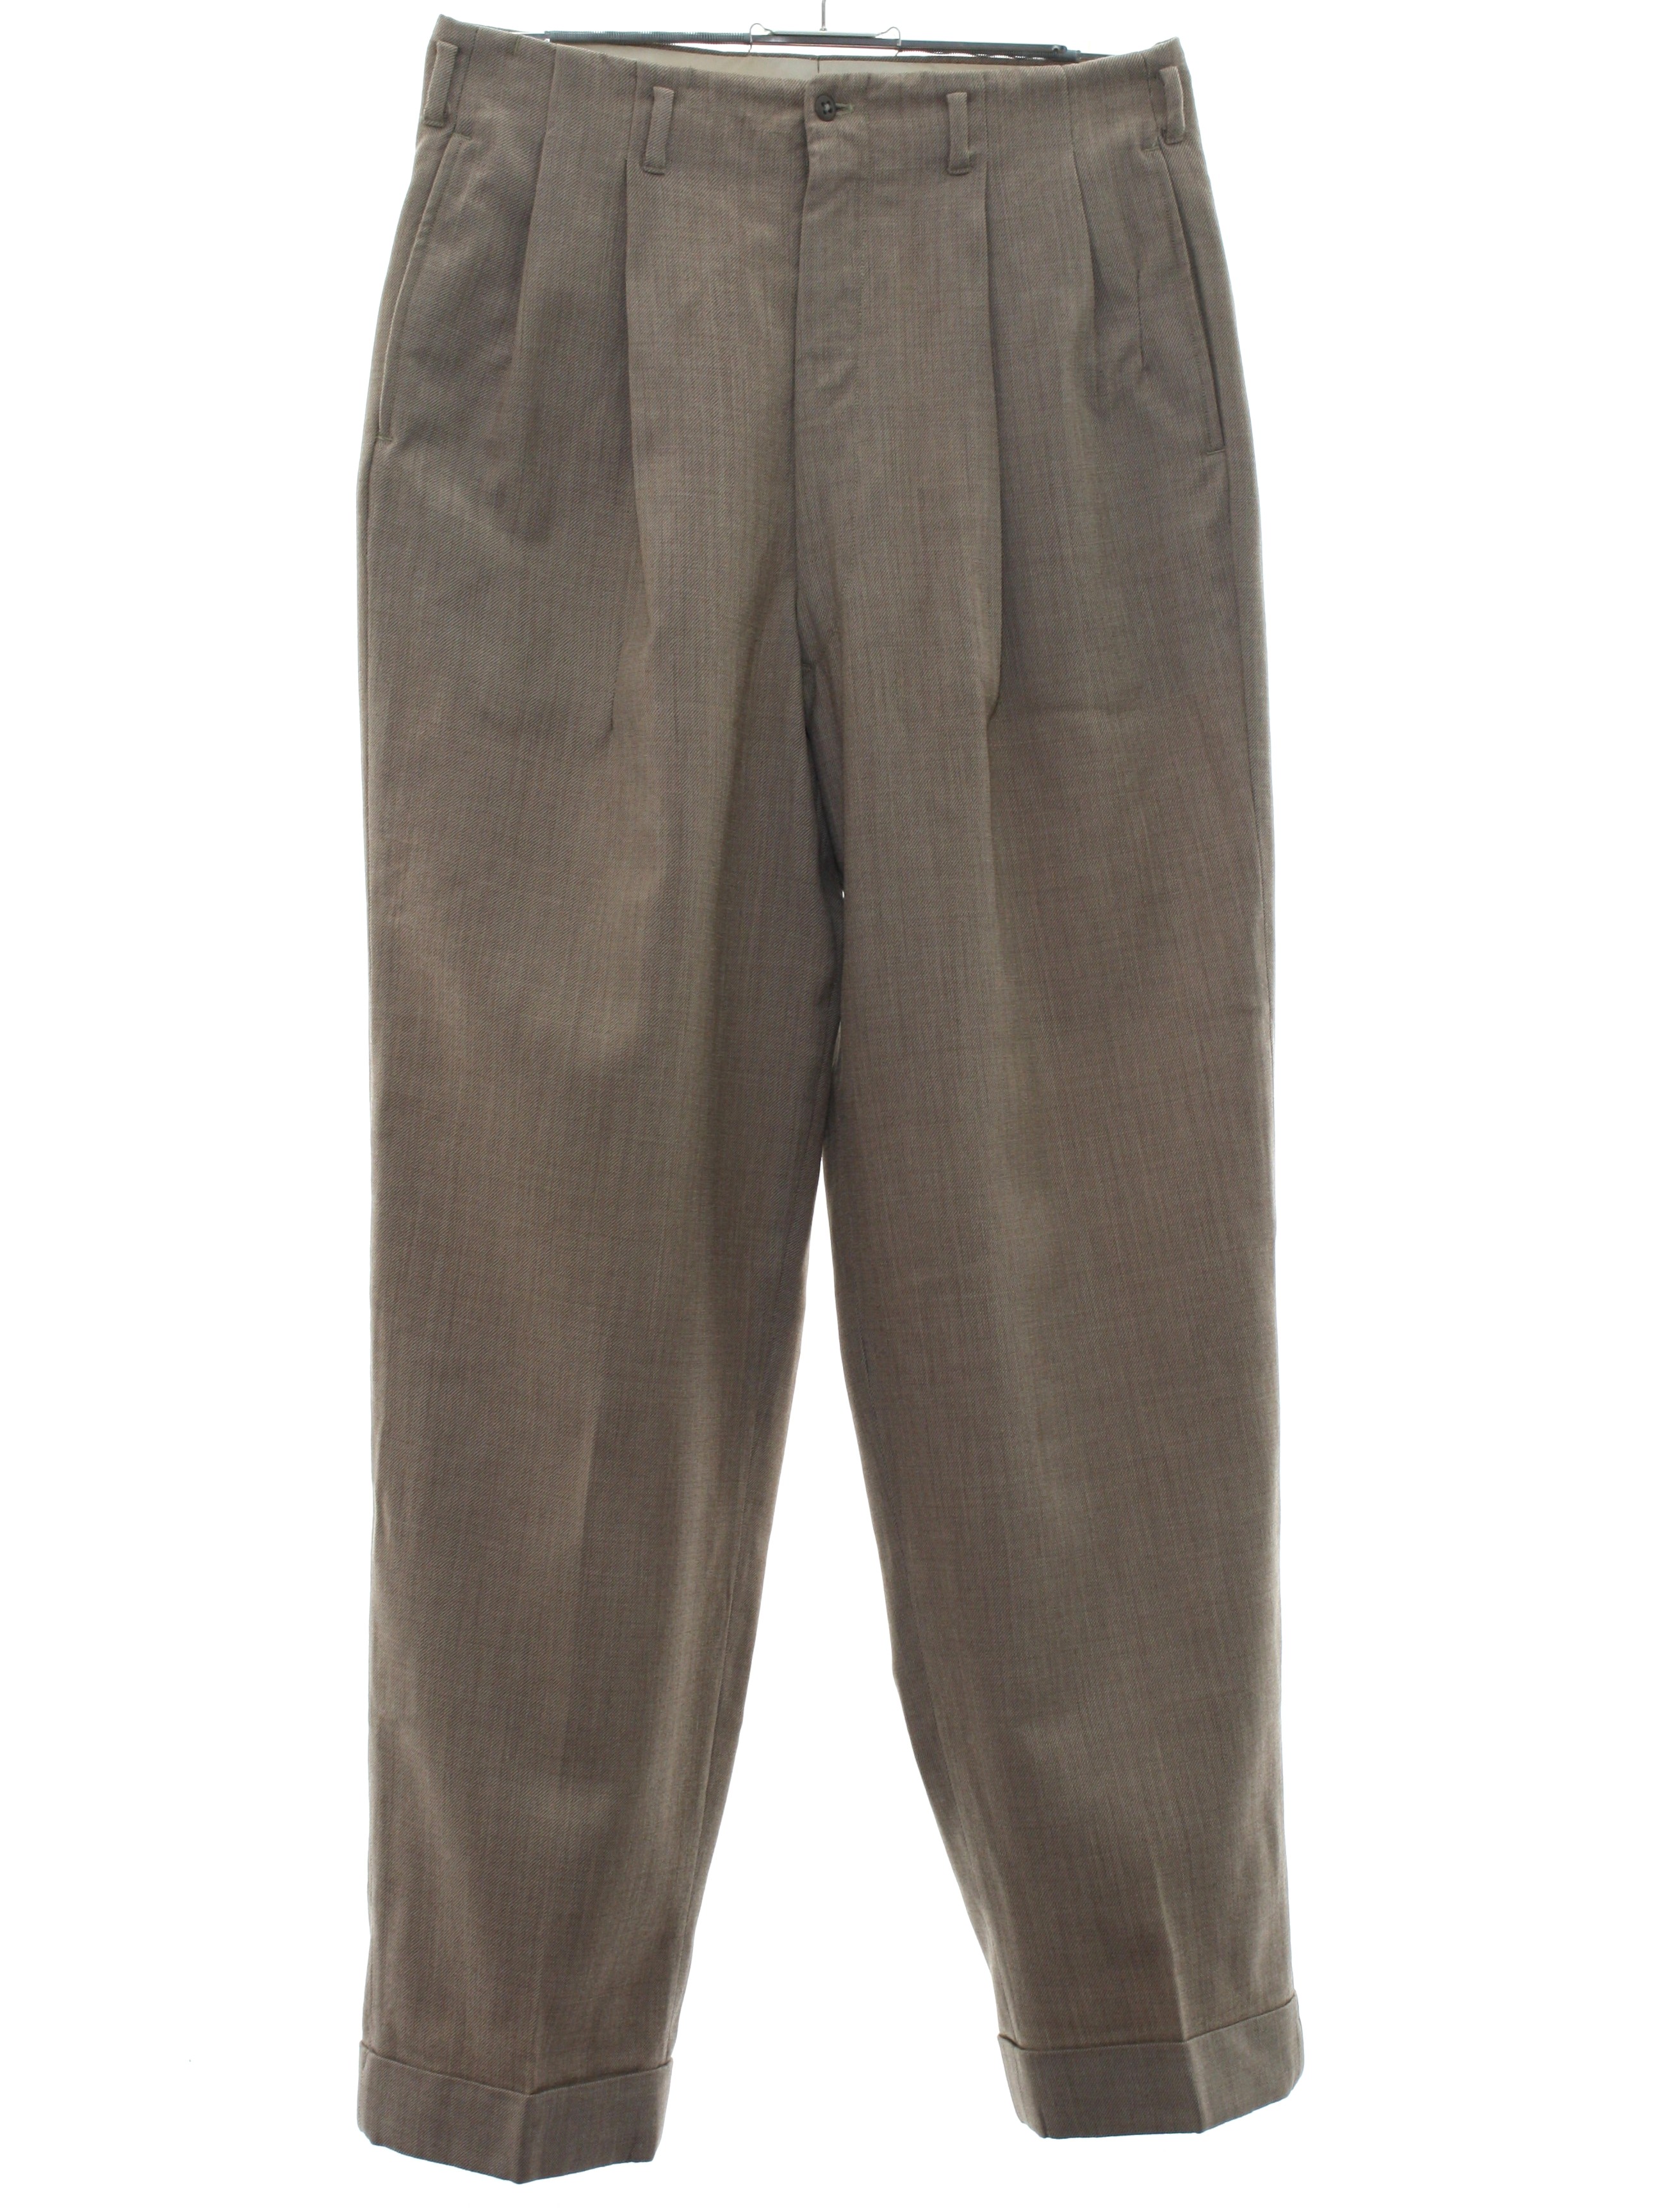 Retro 40's Pants: Late 40s -No Label- Mens tan background, brown wool ...